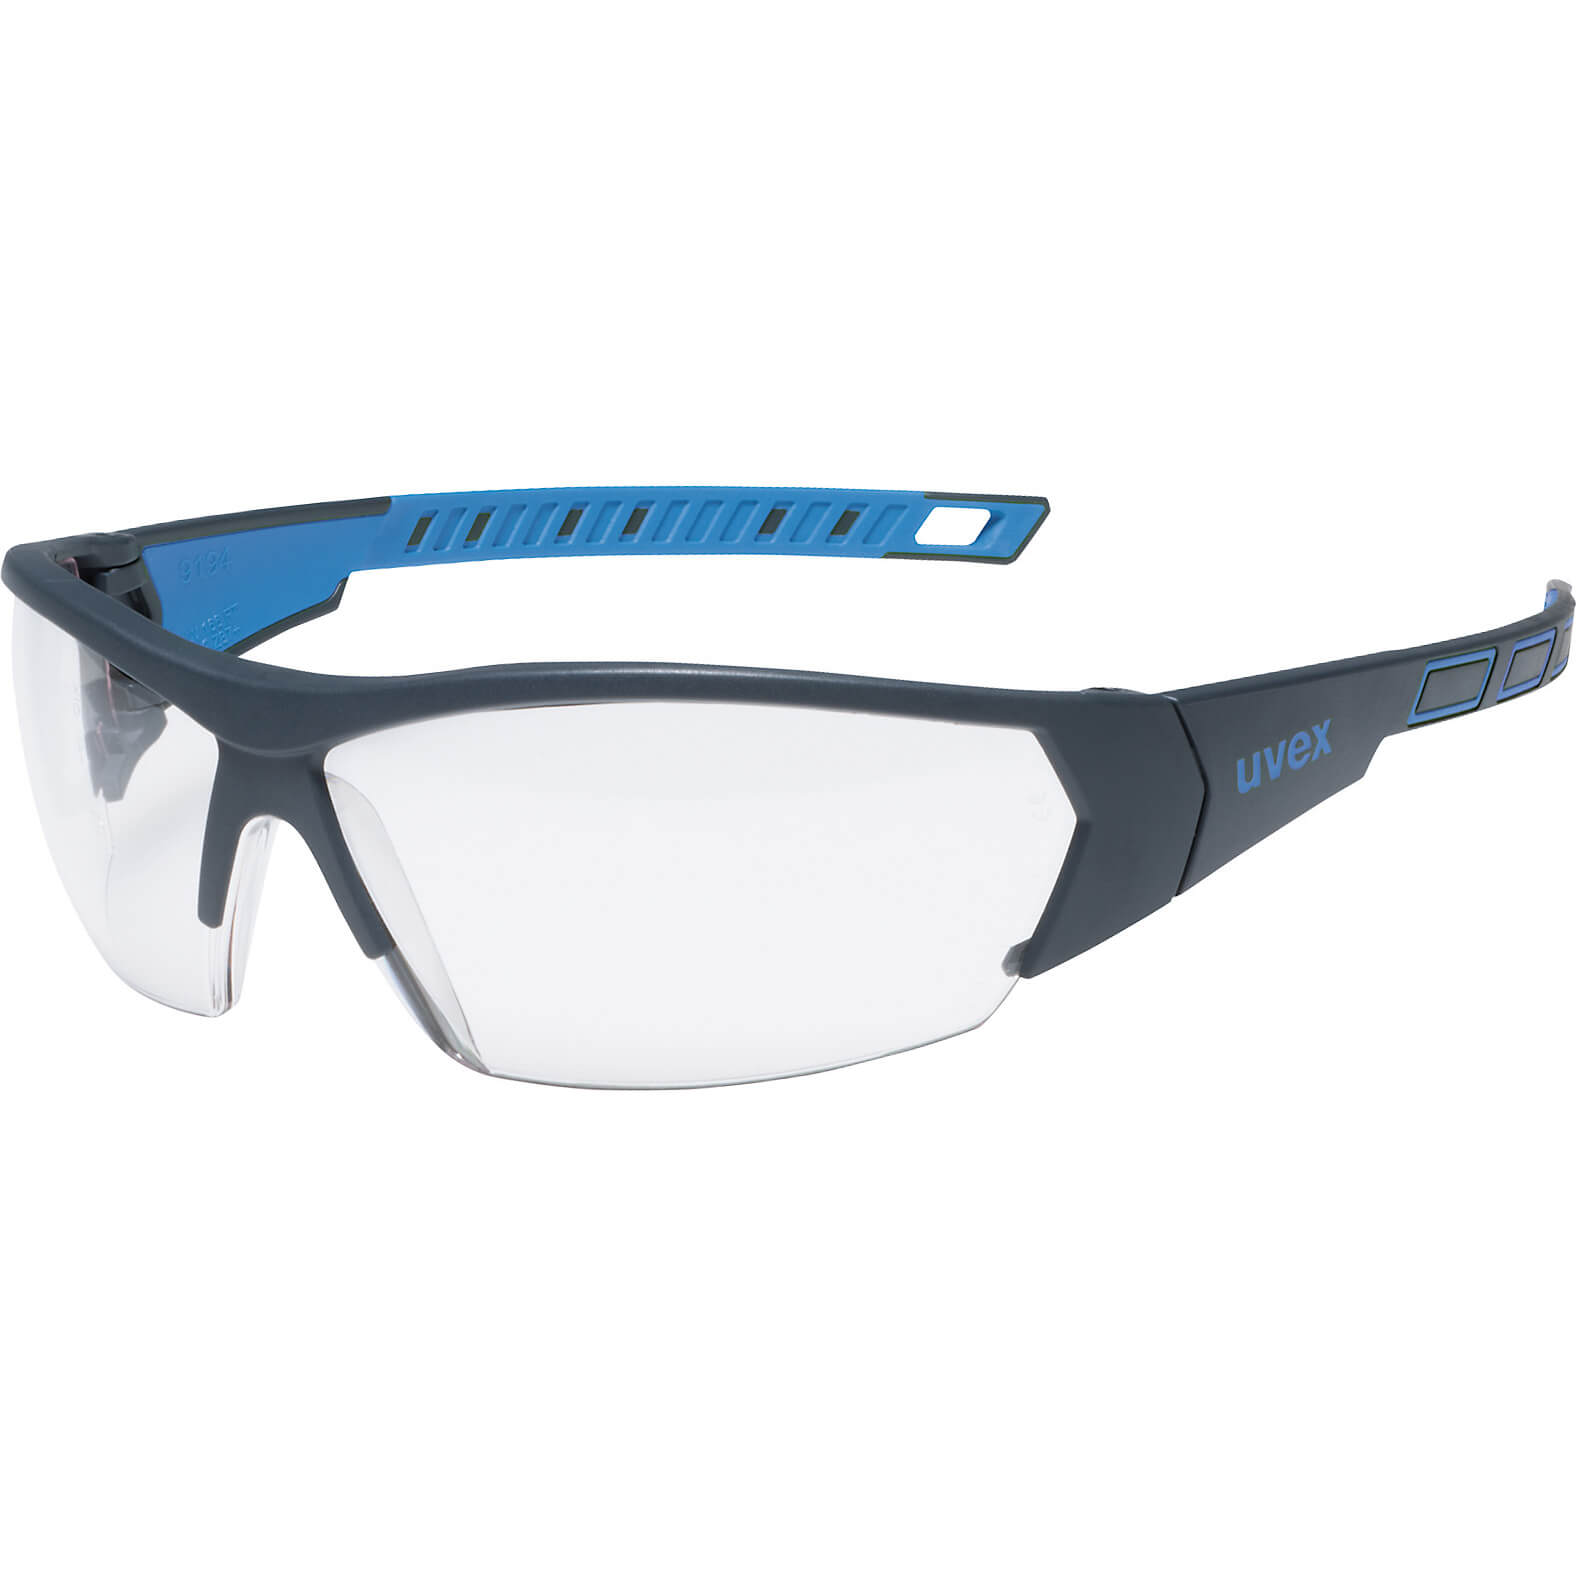 Image of Uvex I-Works Safety Glasses Anthracite Clear